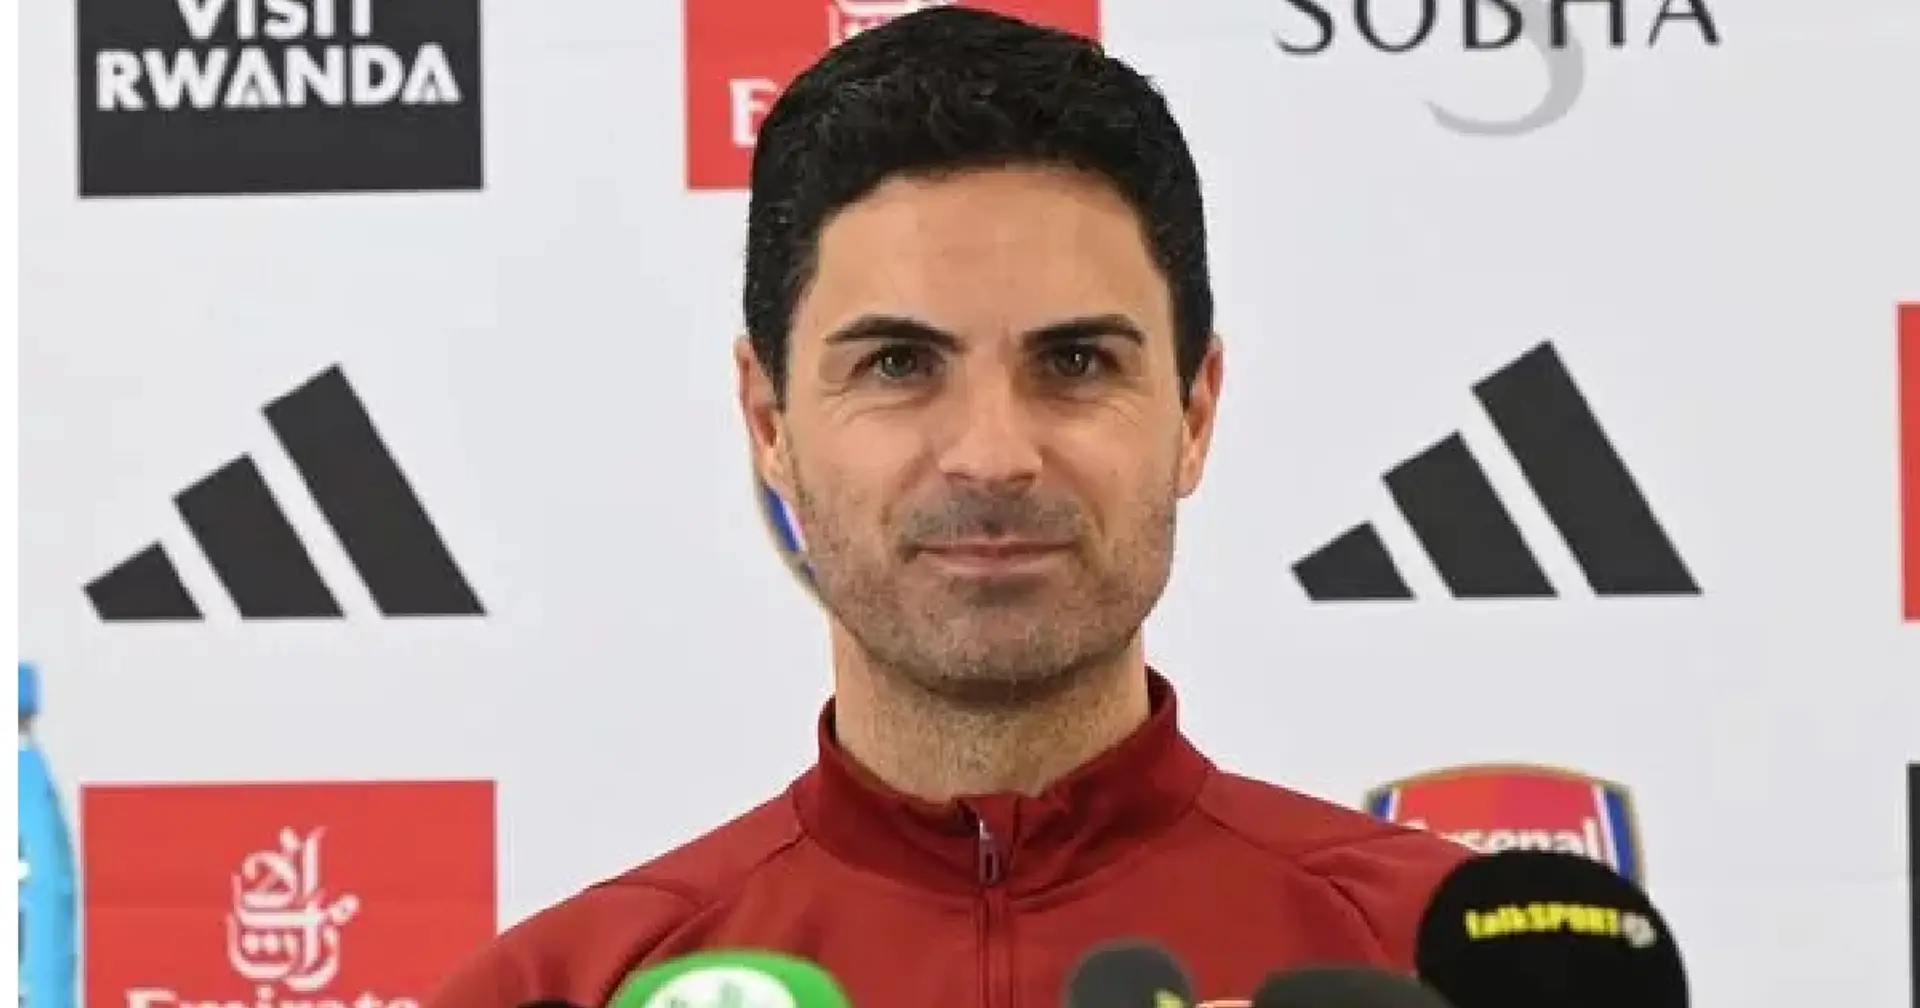 'It's been 14 years': Arteta sends rallying message to Arsenal fans ahead of Porto clash